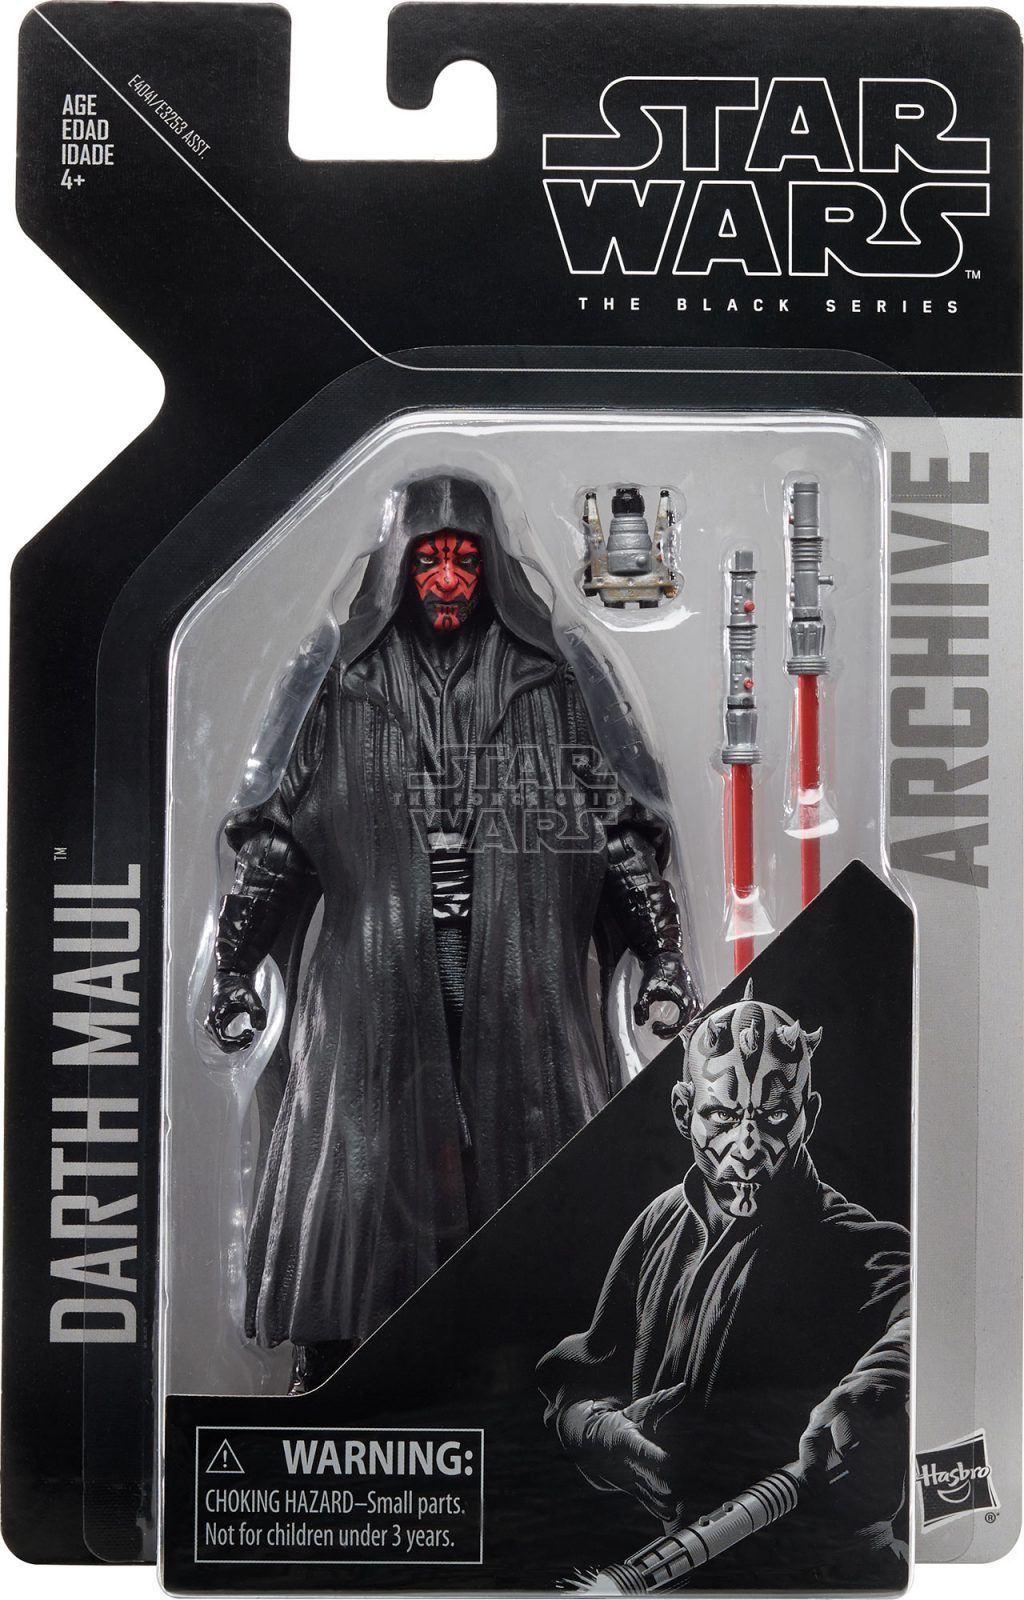 STAR-WARS-THE-BLACK-SERIES-ARCHIVE-6-INCH-Figure-Assortment---Darth-Maul-(in-pck)